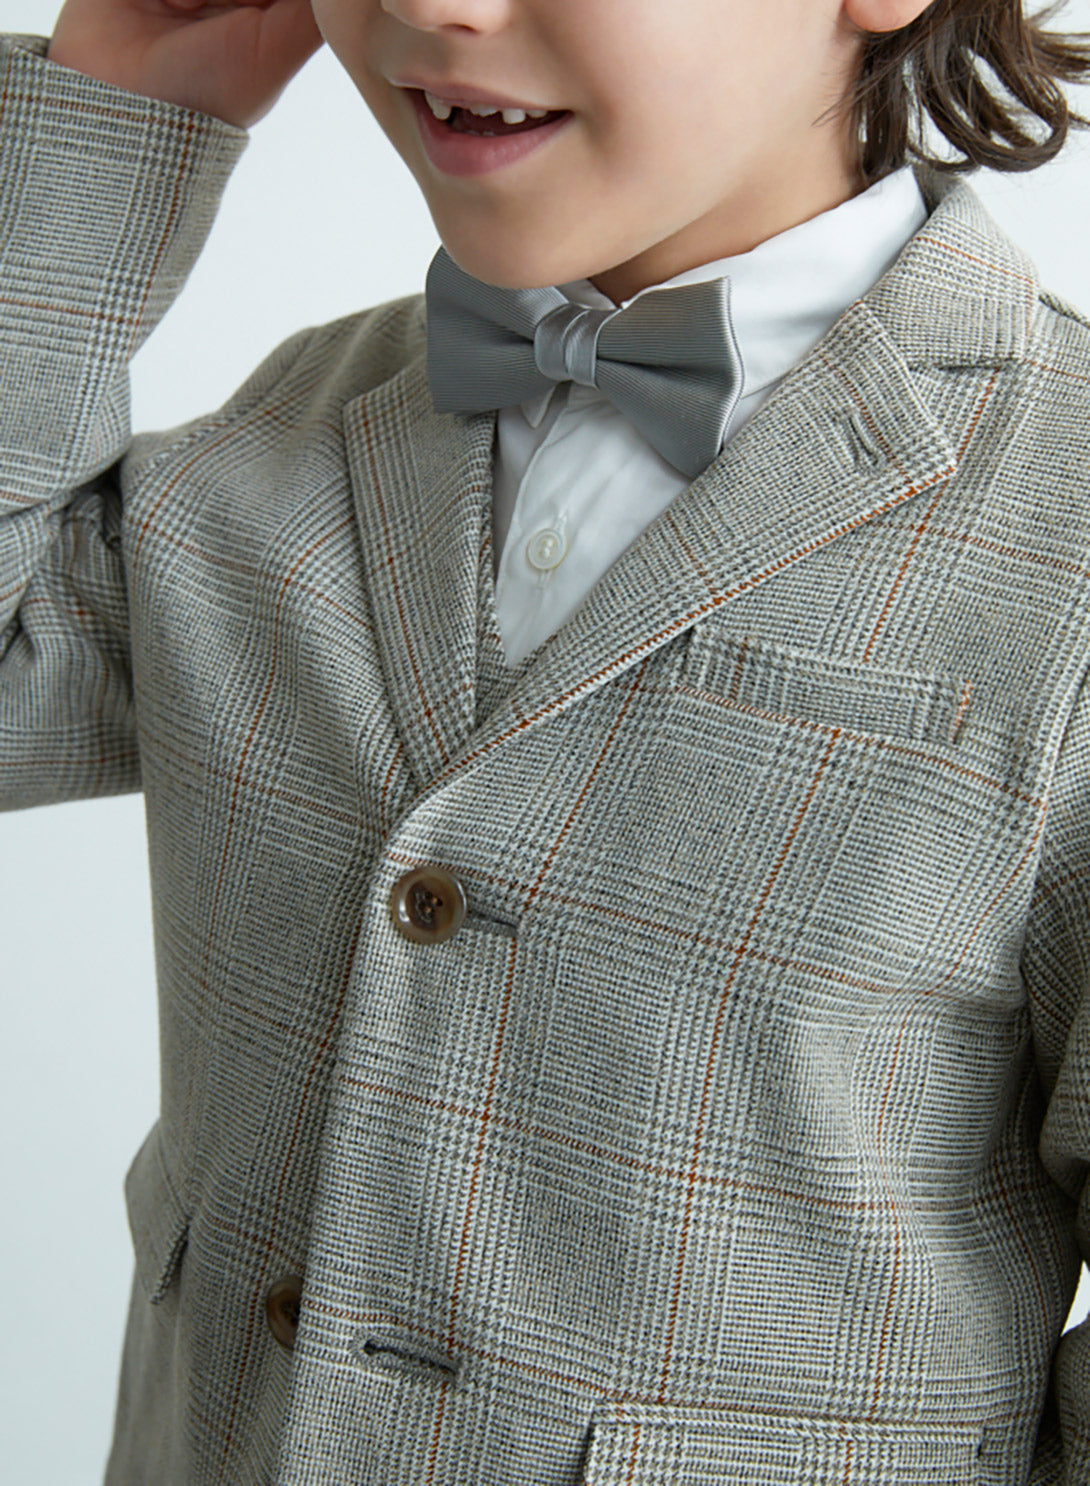 【EAST END HIGHLANDERS】SOLID BOW TIE NAVY / SILVER GREY　ボウタイ  | Coucoubebe/ククベベ